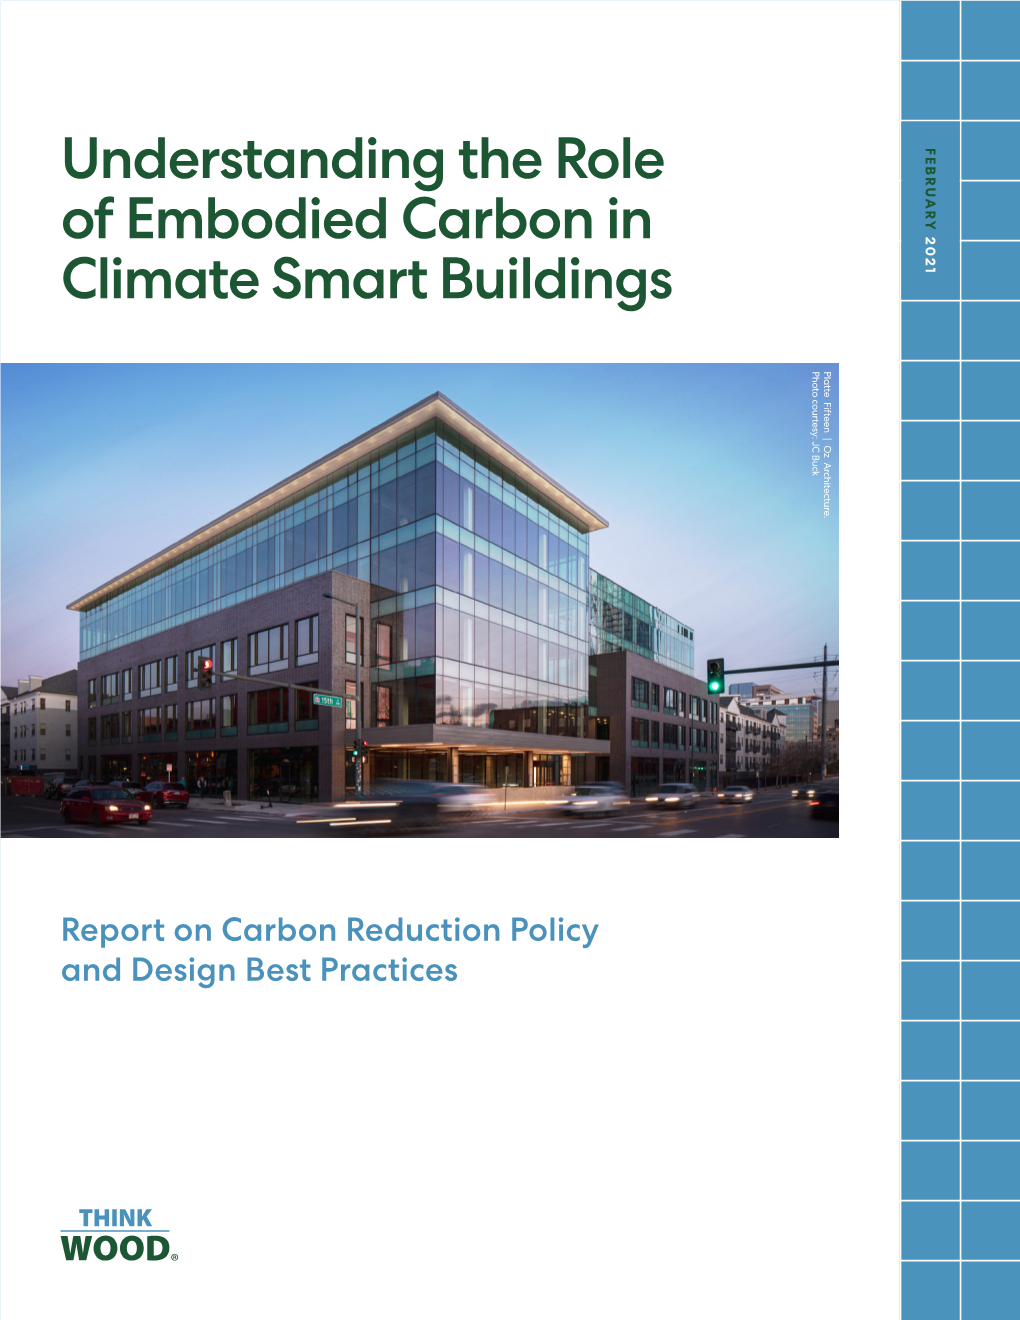 Understanding the Role of Embodied Carbon in Climate Smart Buildings